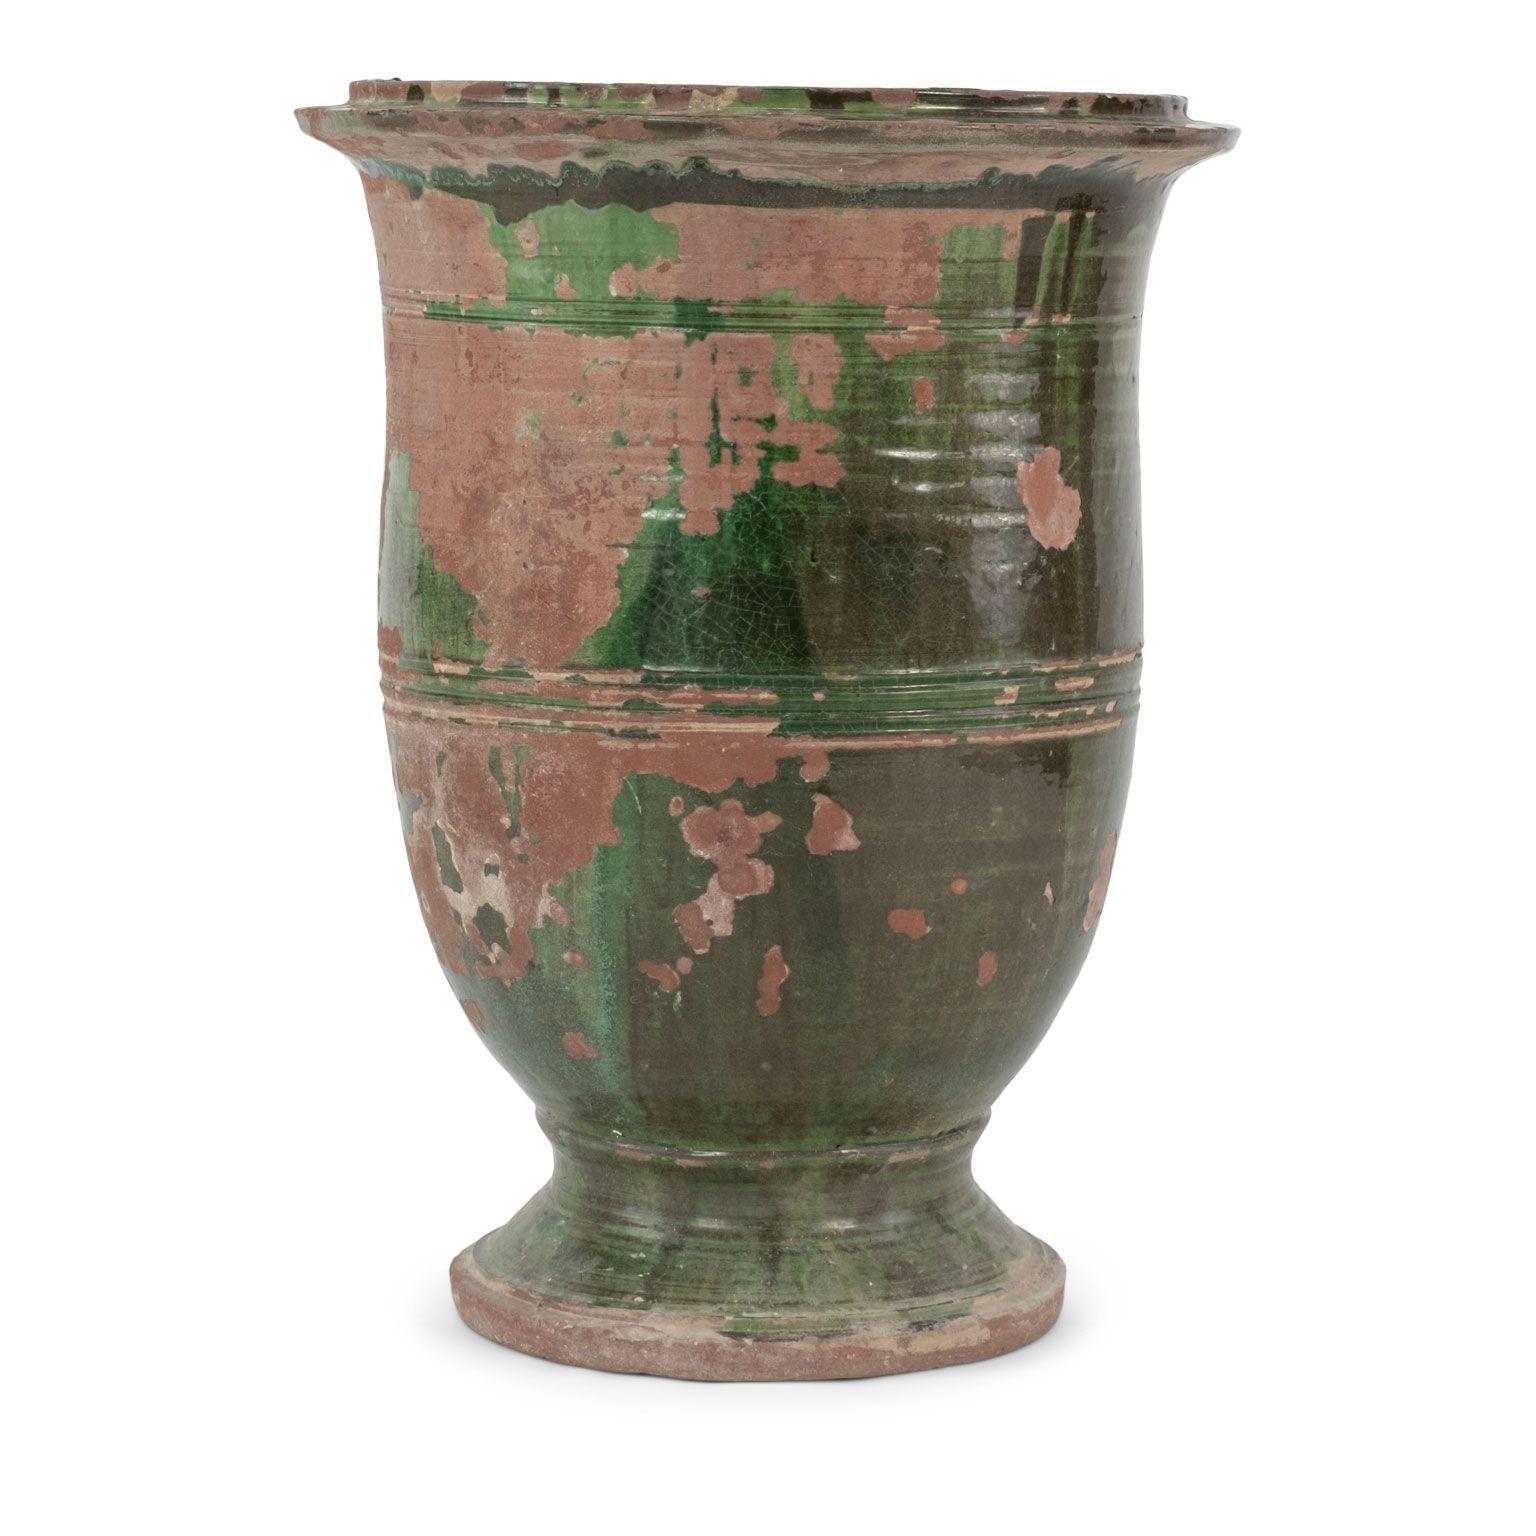 Tall slender green-glazed anduze jar, almost shaped like an olivette jar. Slight curve so body leans to one side. Circa early 1900s.